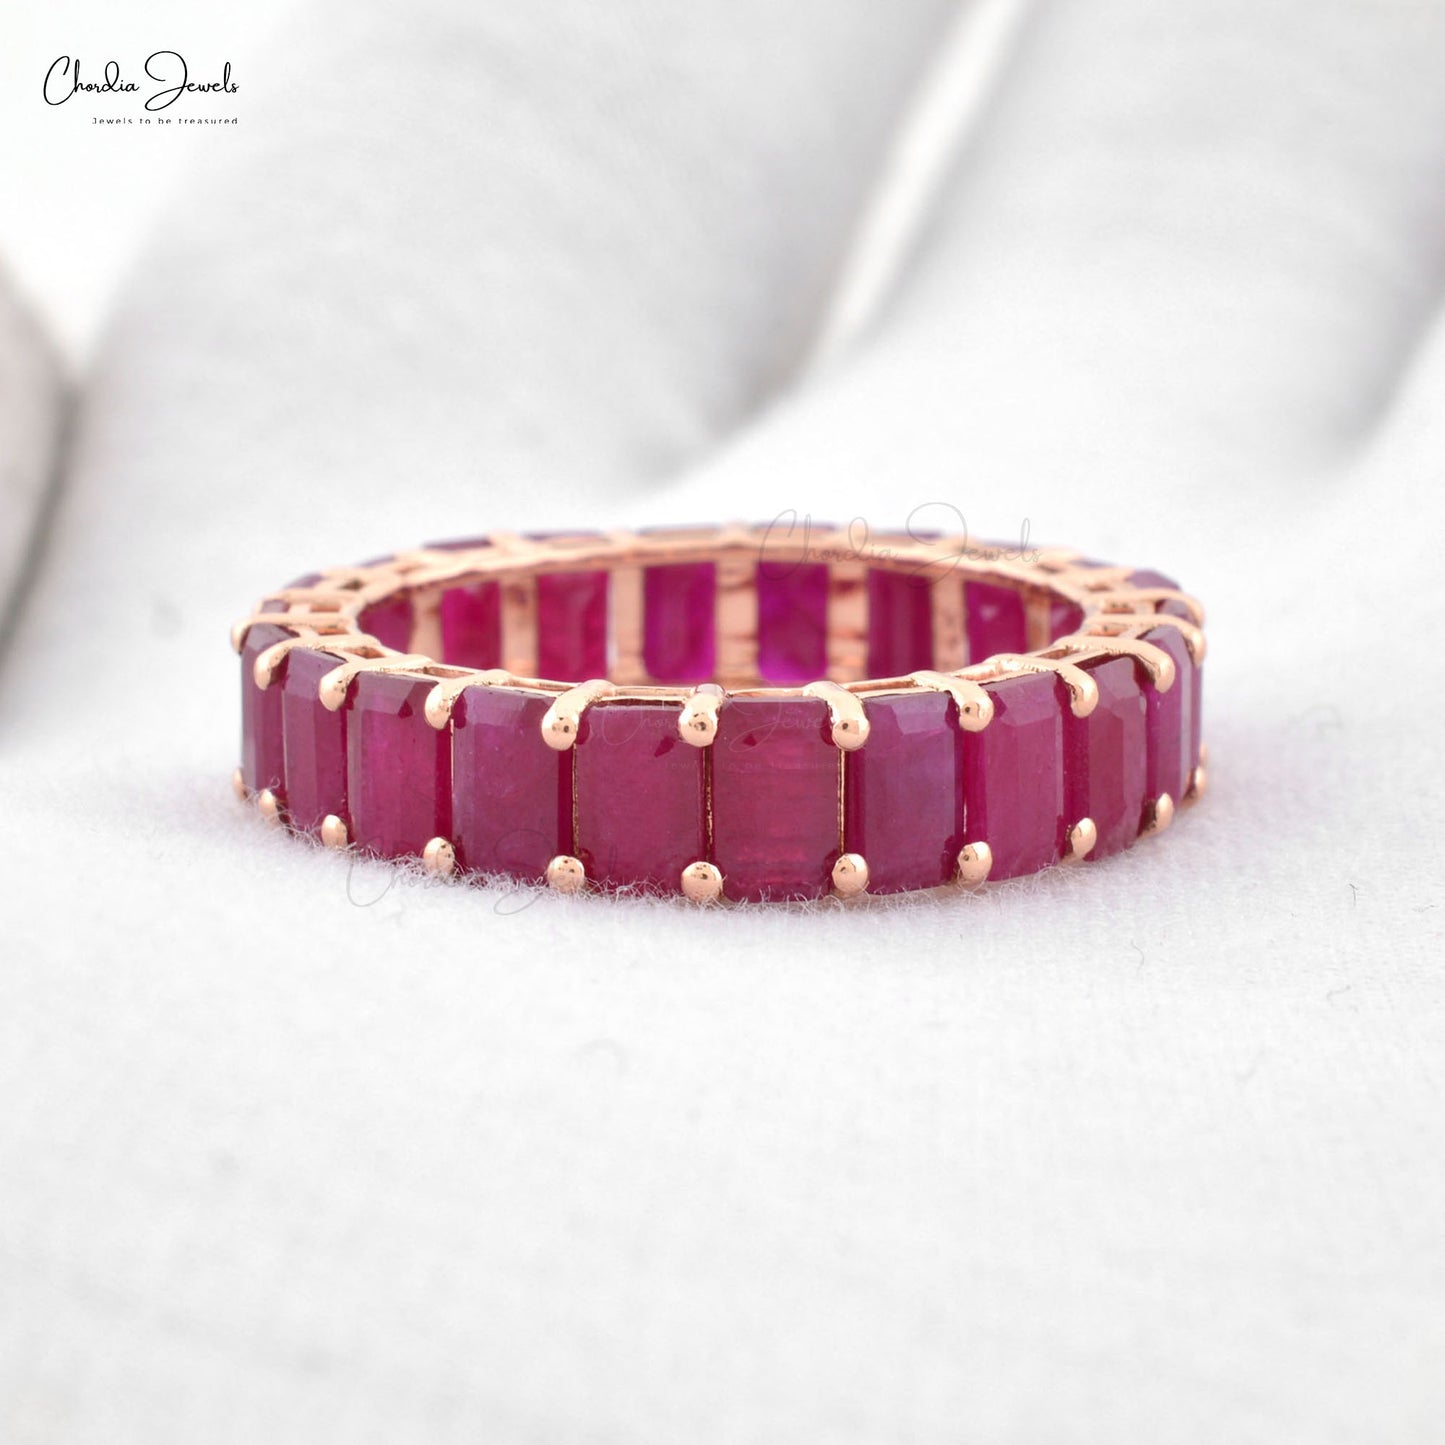 Load image into Gallery viewer, Octagon Cut 5x3mm Natural Ruby Ring Band For Her 4.94Ct Gemstone Eternity Band 14k Solid Rose Gold Eternity Wedding Bands
